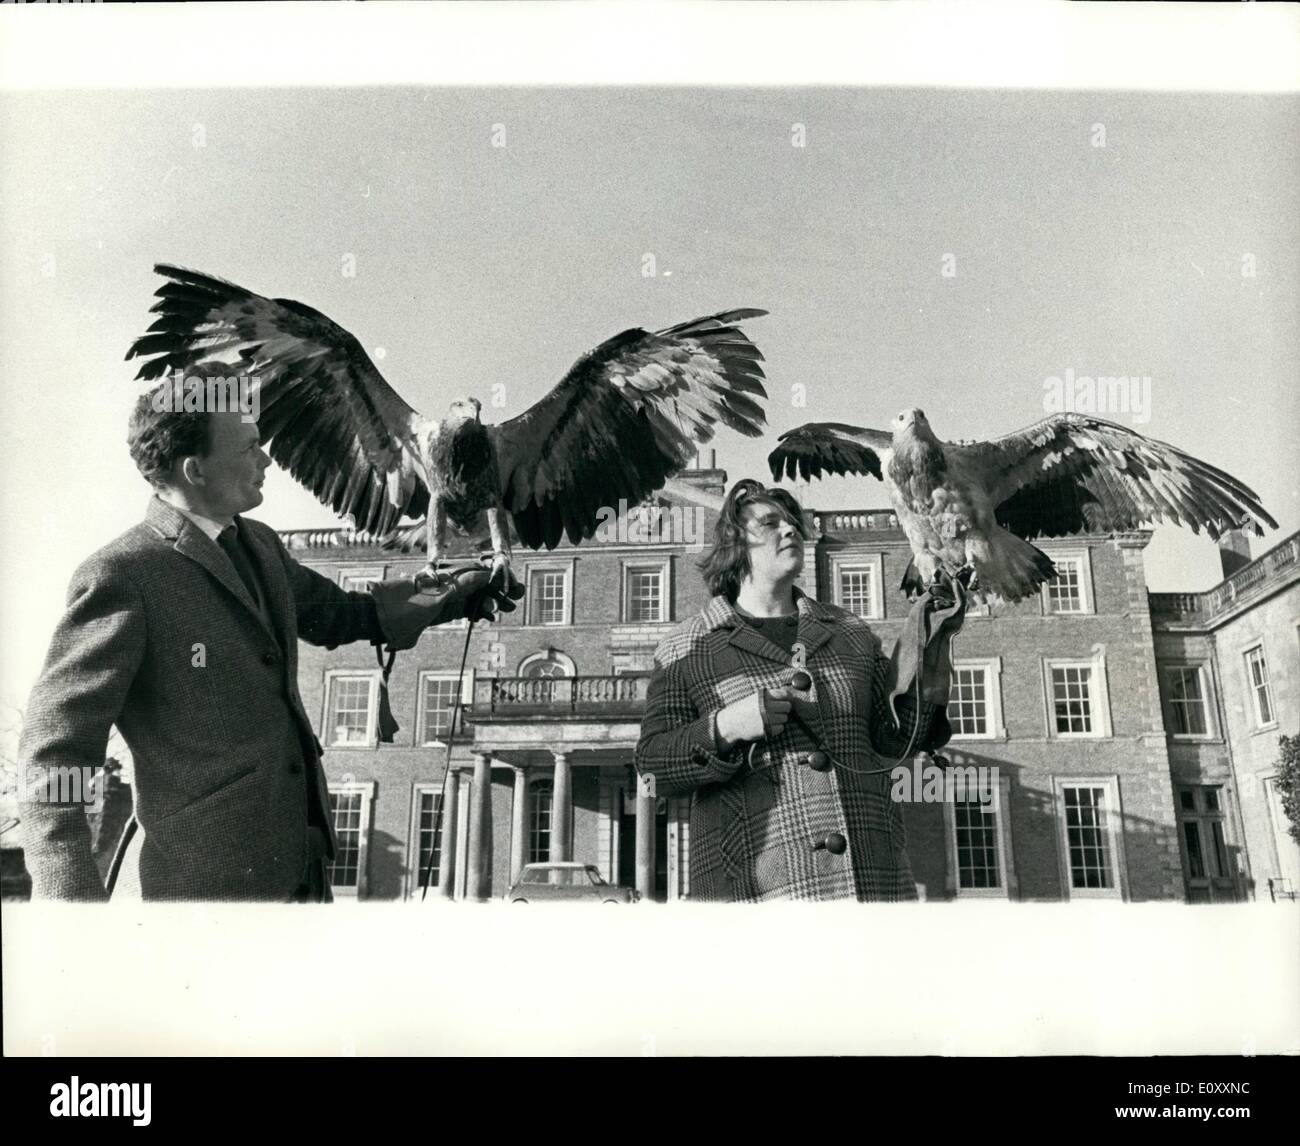 Jan. 01, 1968 - Eagles from Manila have lessons in hunting; Two rare eagles from the Philippines have been sent to ''School'' at Weston Park, Shifnal, Salop, home of hte Karl of Bradford. The bird owned by Mrs. J. Lalos, a game warden in Manila, are being trained by the Earl's Falconer, Mr. Allan Oswald, to hunt from the wrist. Mr. Oswald believes that he is undertaking the first attempt in Britain to train such birds for hunting. ''I will not be handling these birds very differently from others trained for Falconry,'' he said Stock Photo